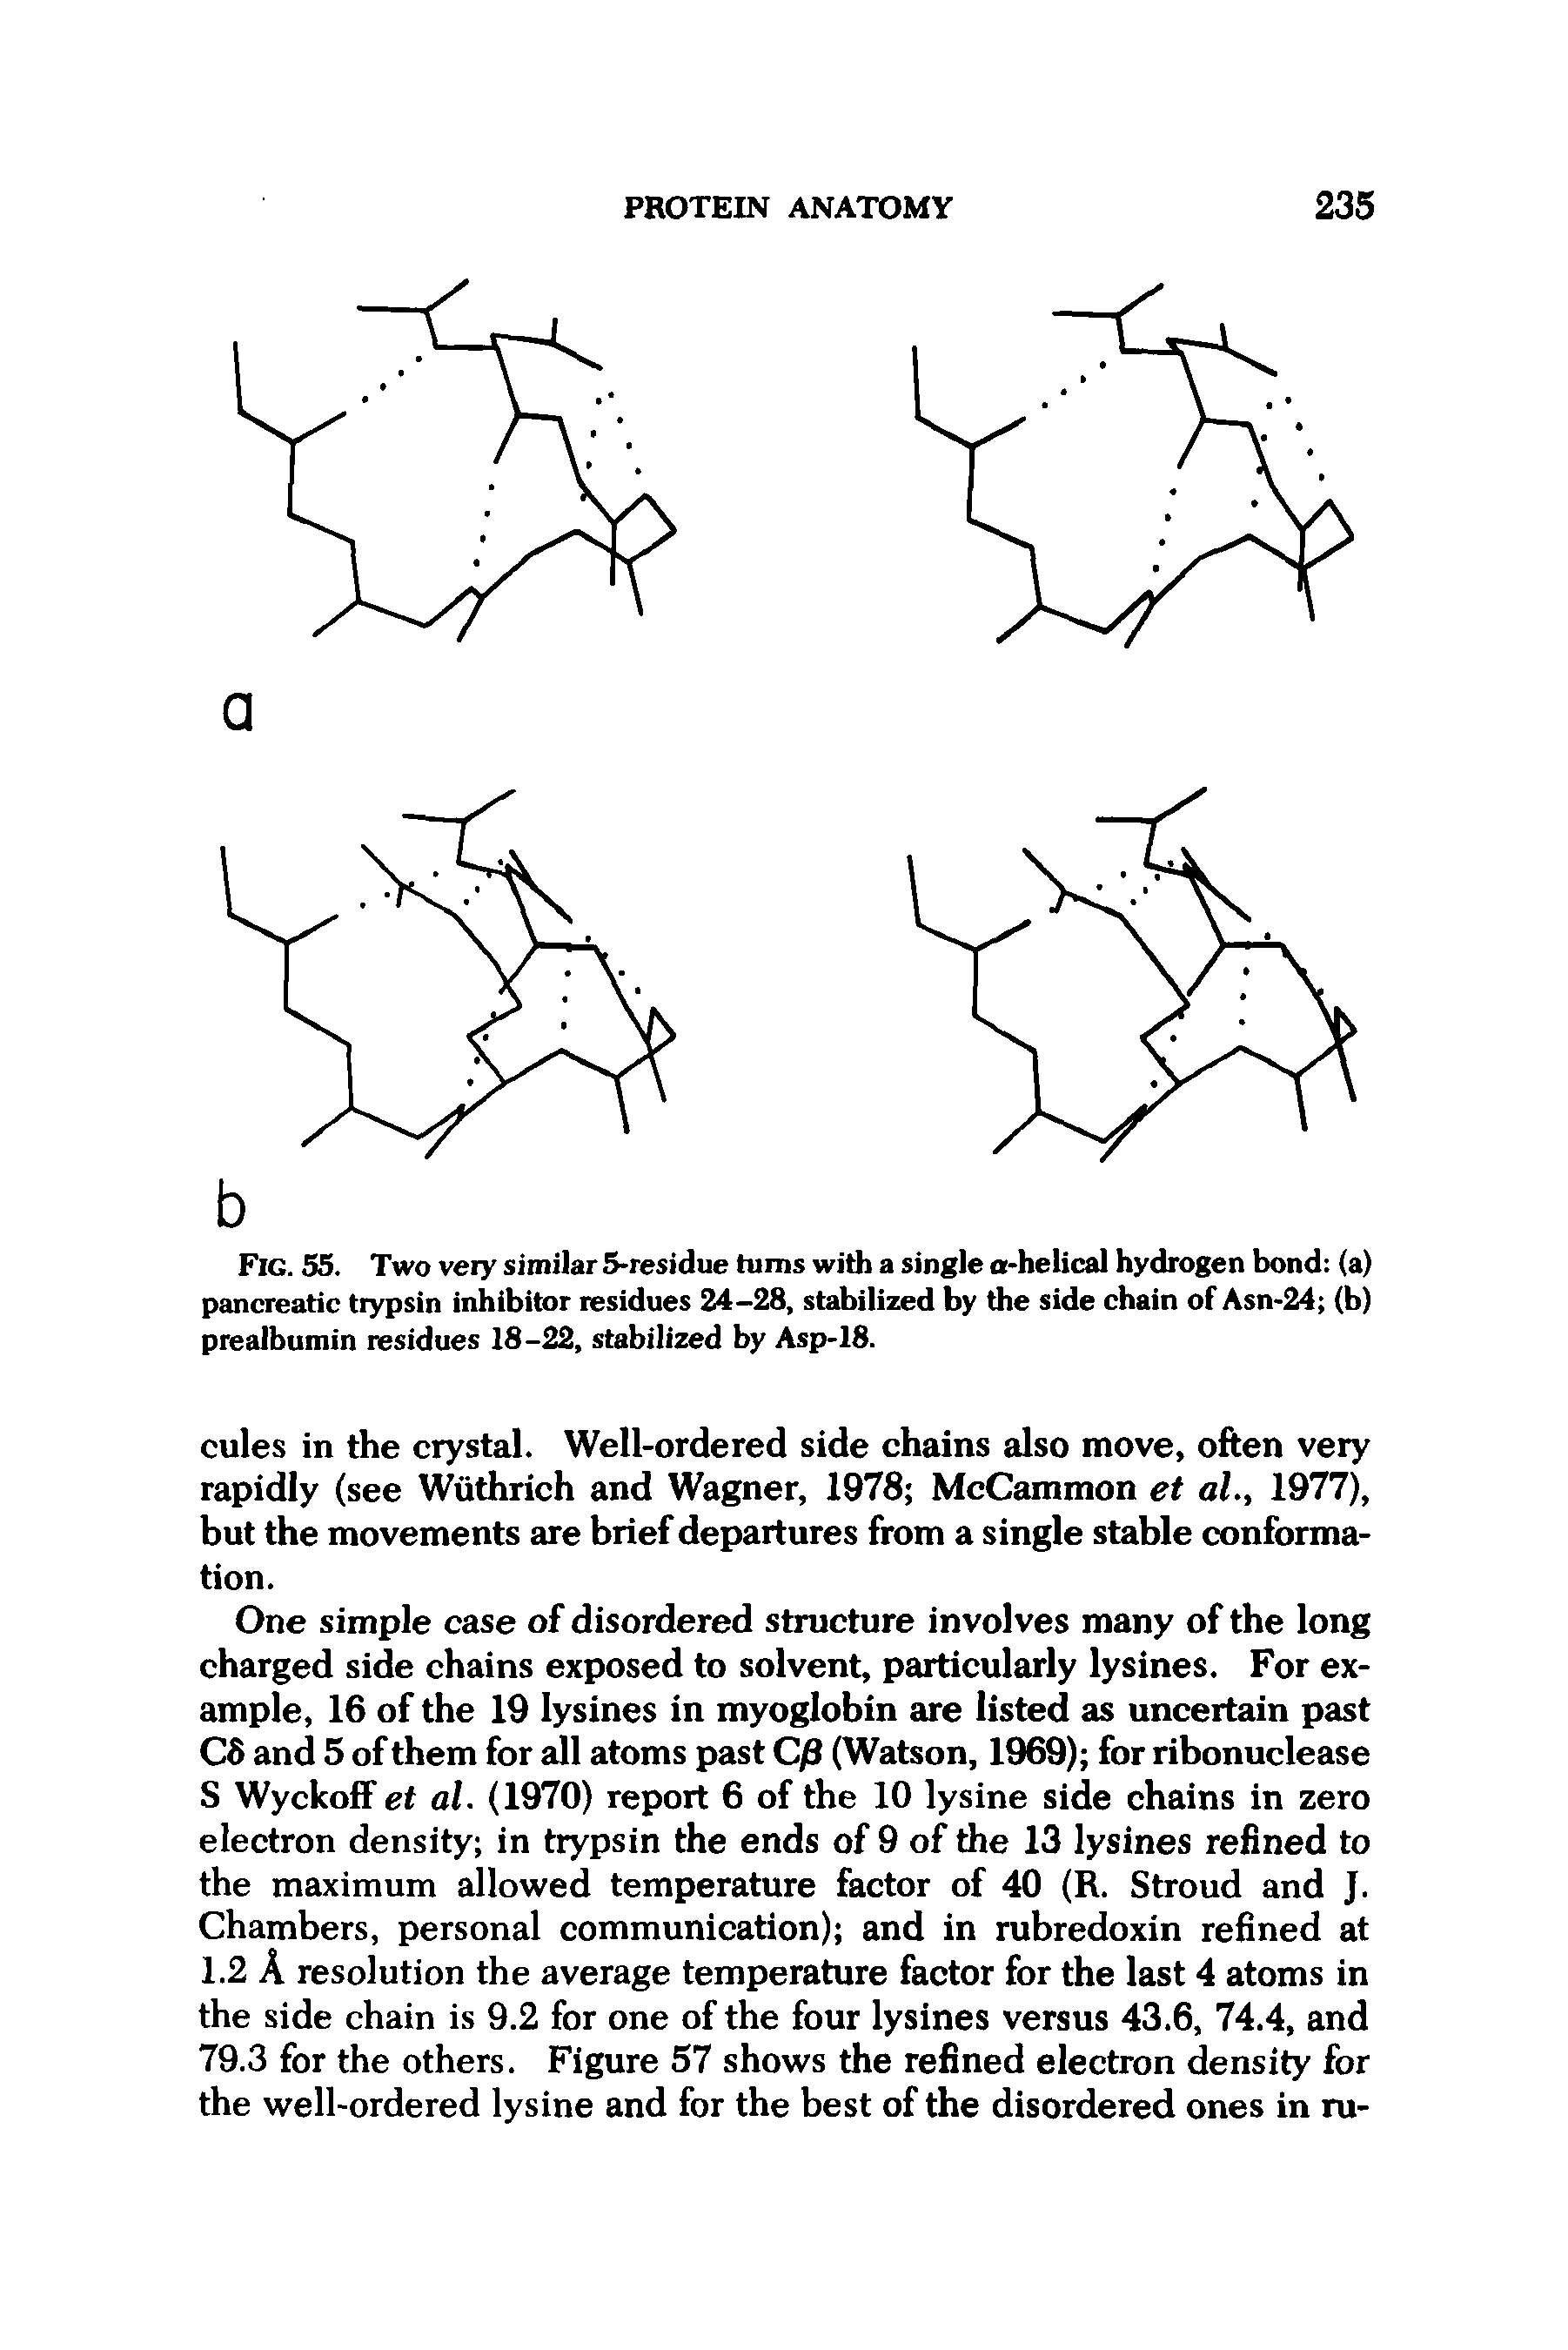 Fig. 55. Two very similar 5-residue turns with a single a-helical hydrogen bond (a) pancreatic trypsin inhibitor residues 24-28, stabilized by the side chain of Asn-24 (b) prealbumin residues 18-22, stabilized by Asp-18.